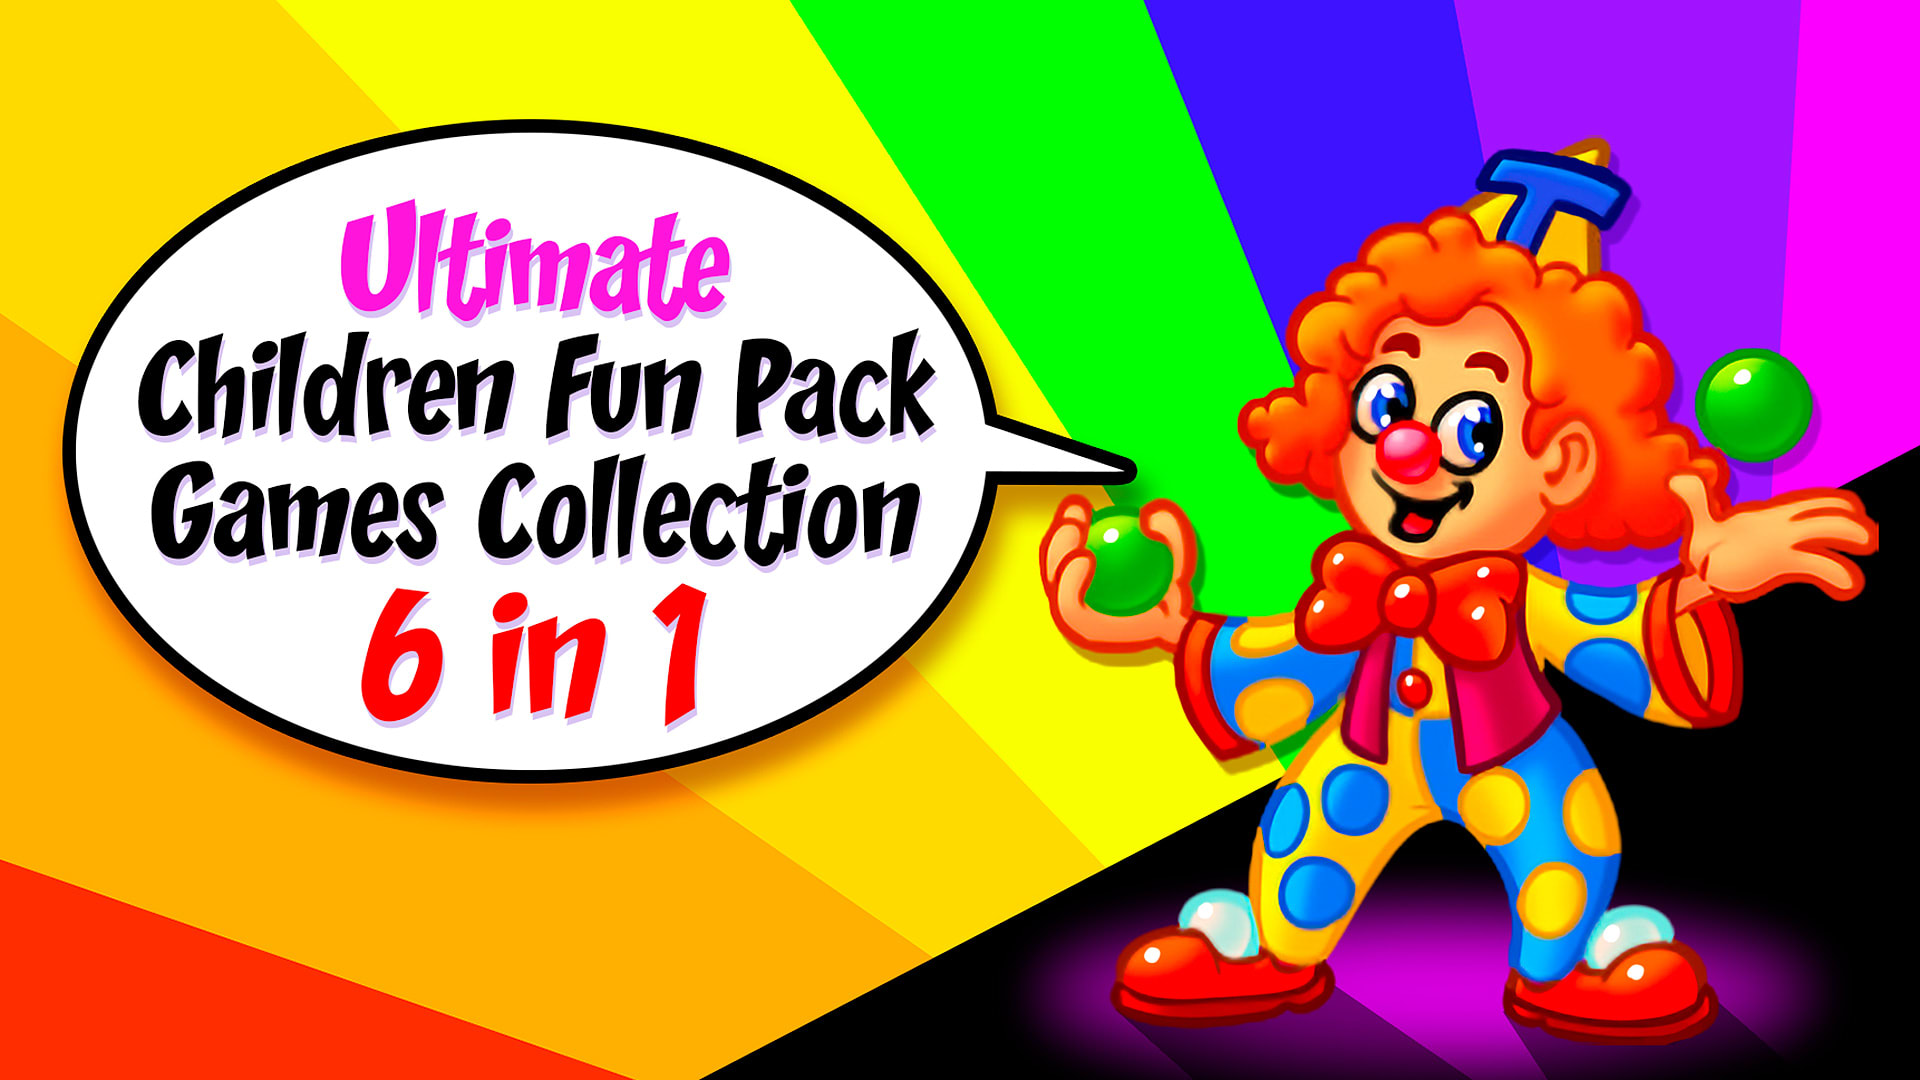 Ultimate Children Fun Pack Games Collection 6 in 1